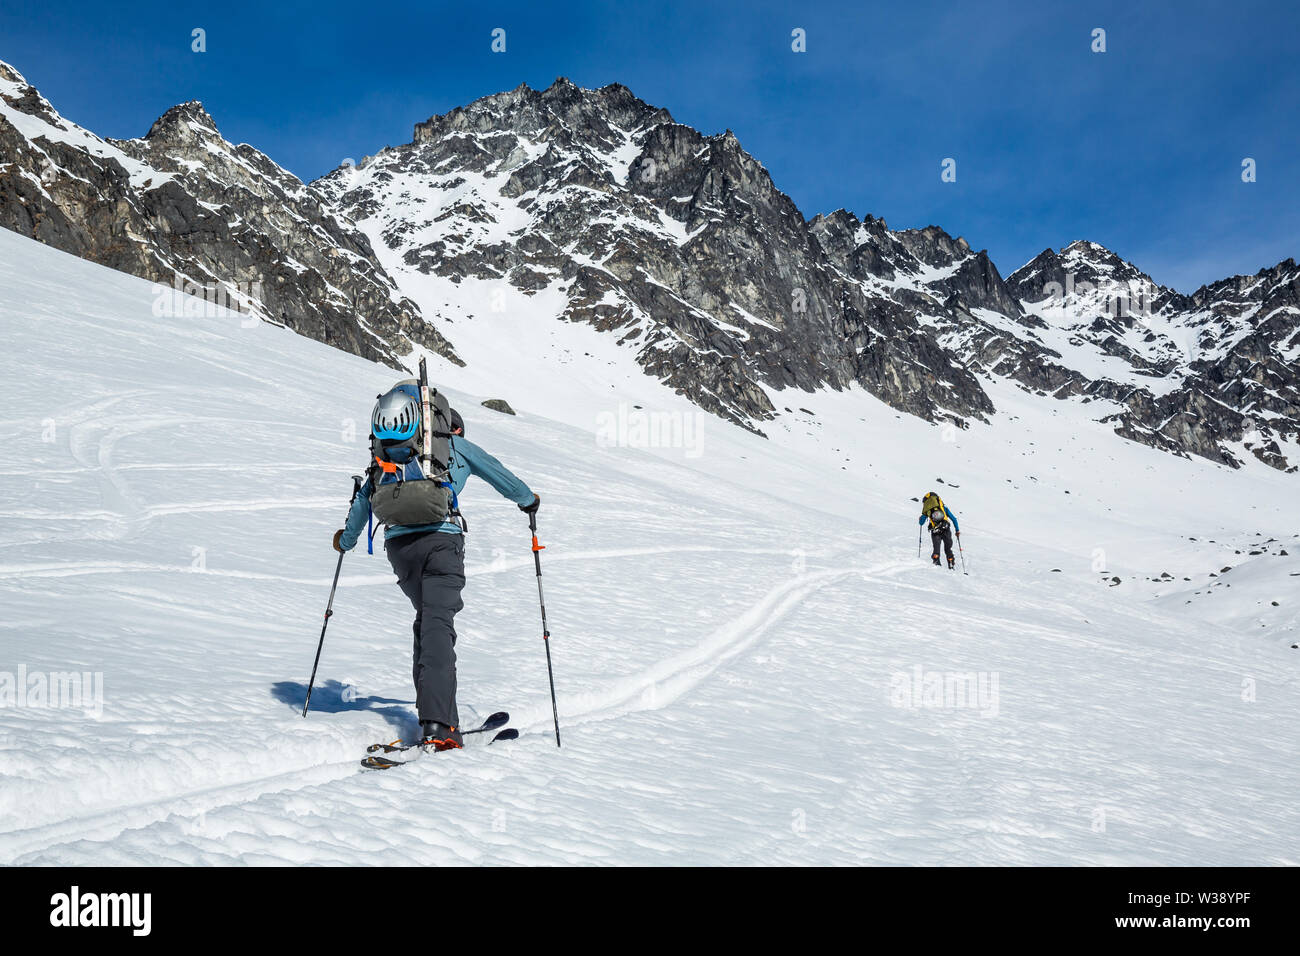 Two skiers skinning uphill on a slope near the old Snowbird Mine site. They are in the Hatcher Pass area of the Talkeetna Mountains of Alaska. Skiing Stock Photo